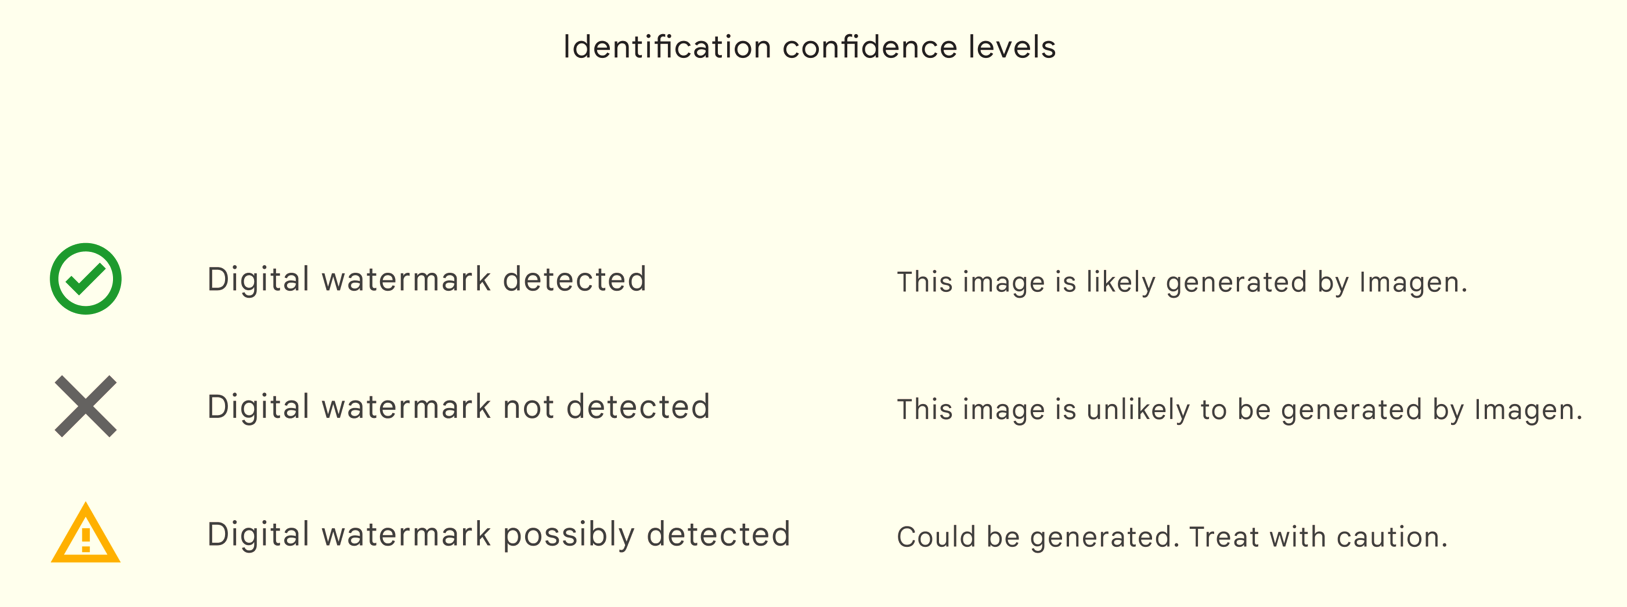 SynthID has 3 levels of confidence when it comes to AI detection.